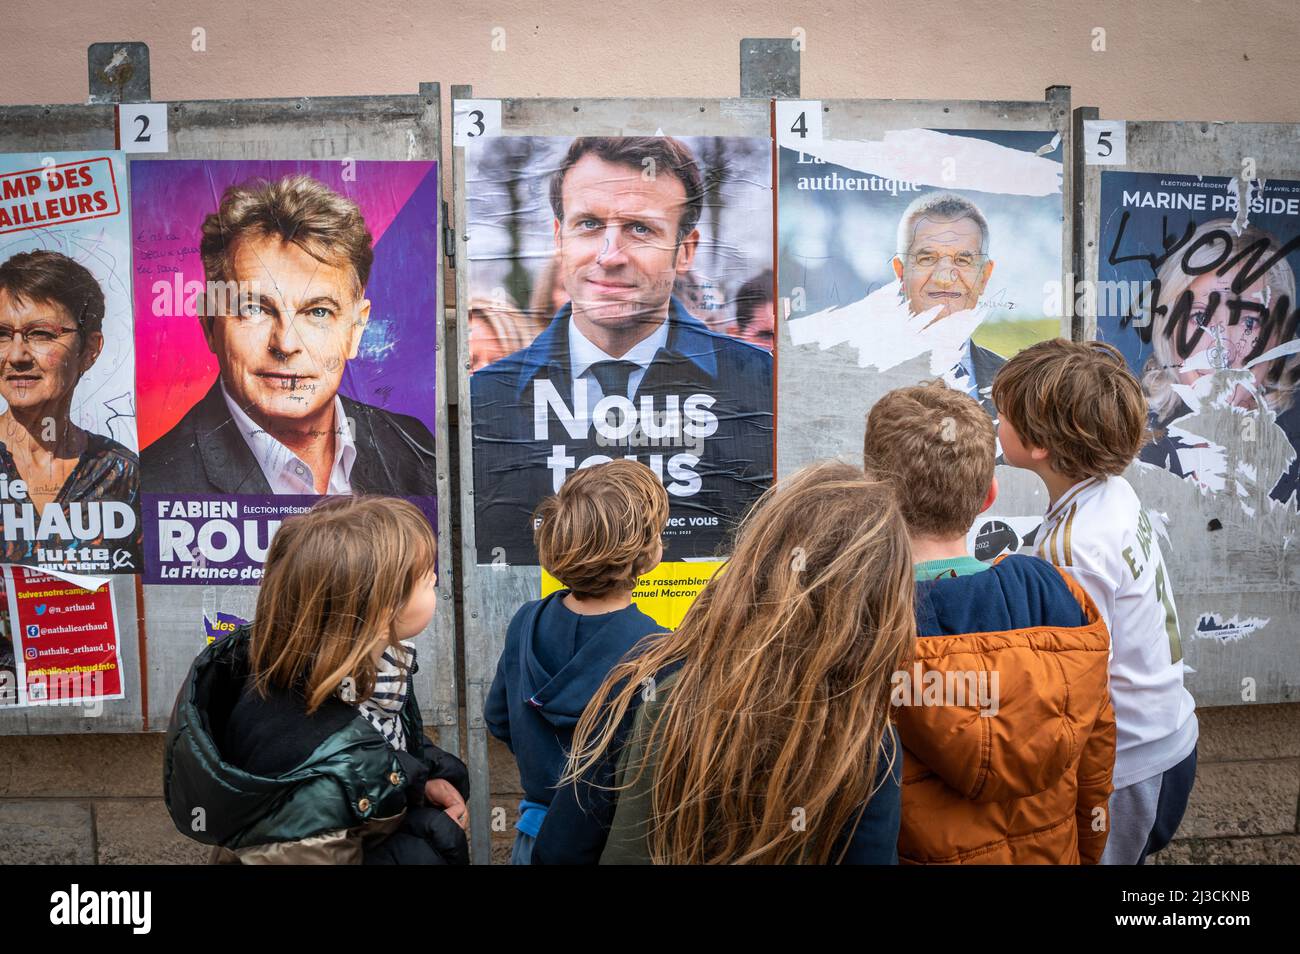 Lyon - Rhone Alpes Auvergne - France - 06 April 2022 - view of the French candidates for the 2022 presidential elections Stock Photo